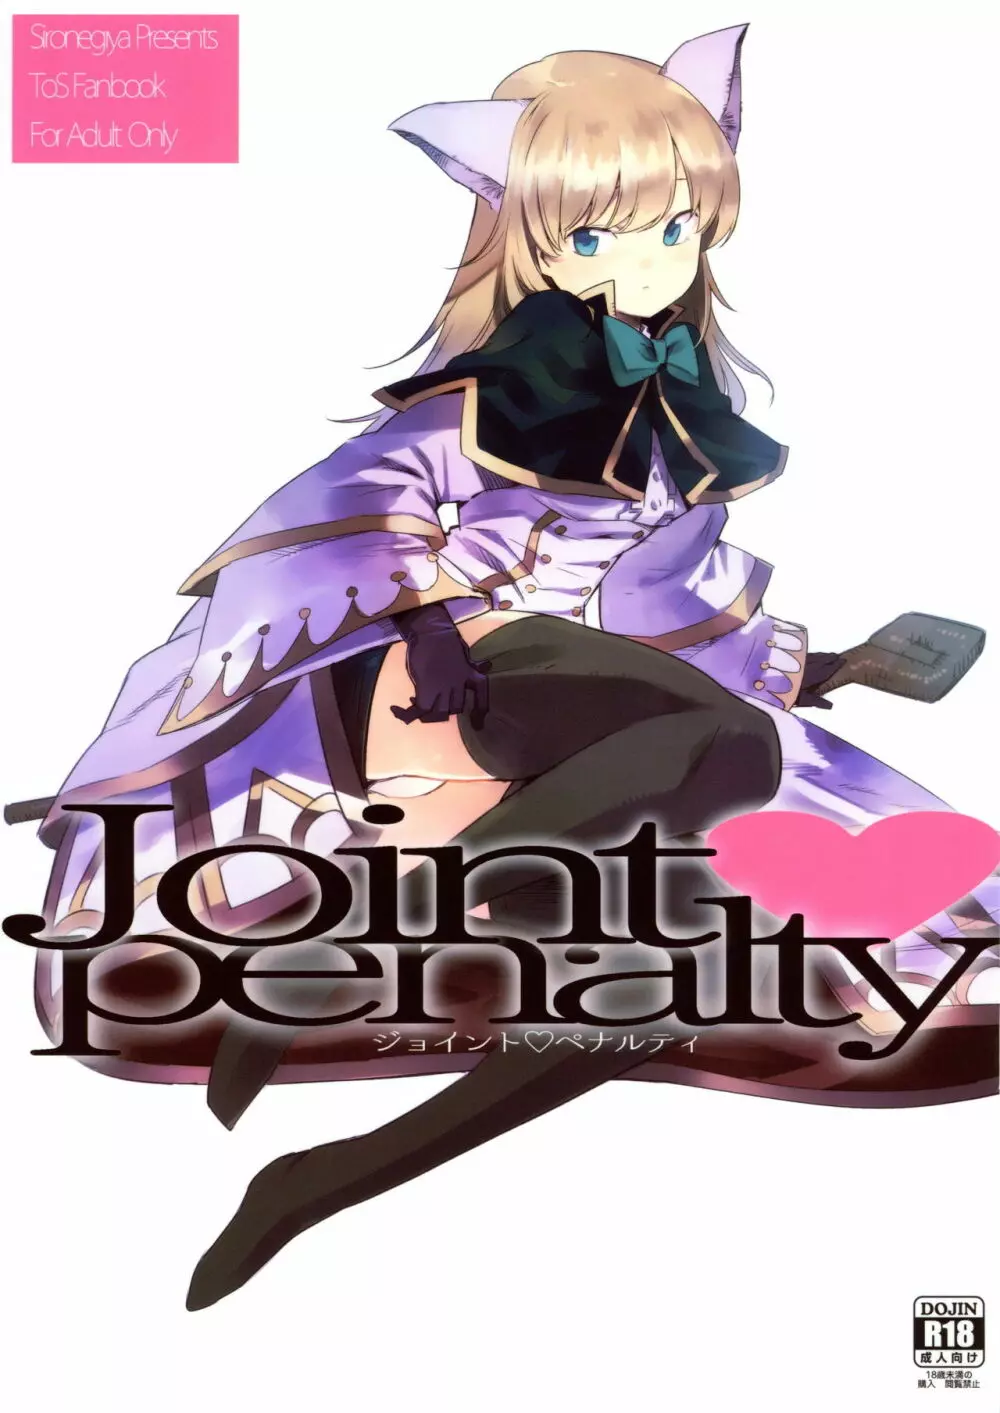 Joint penalty 1ページ